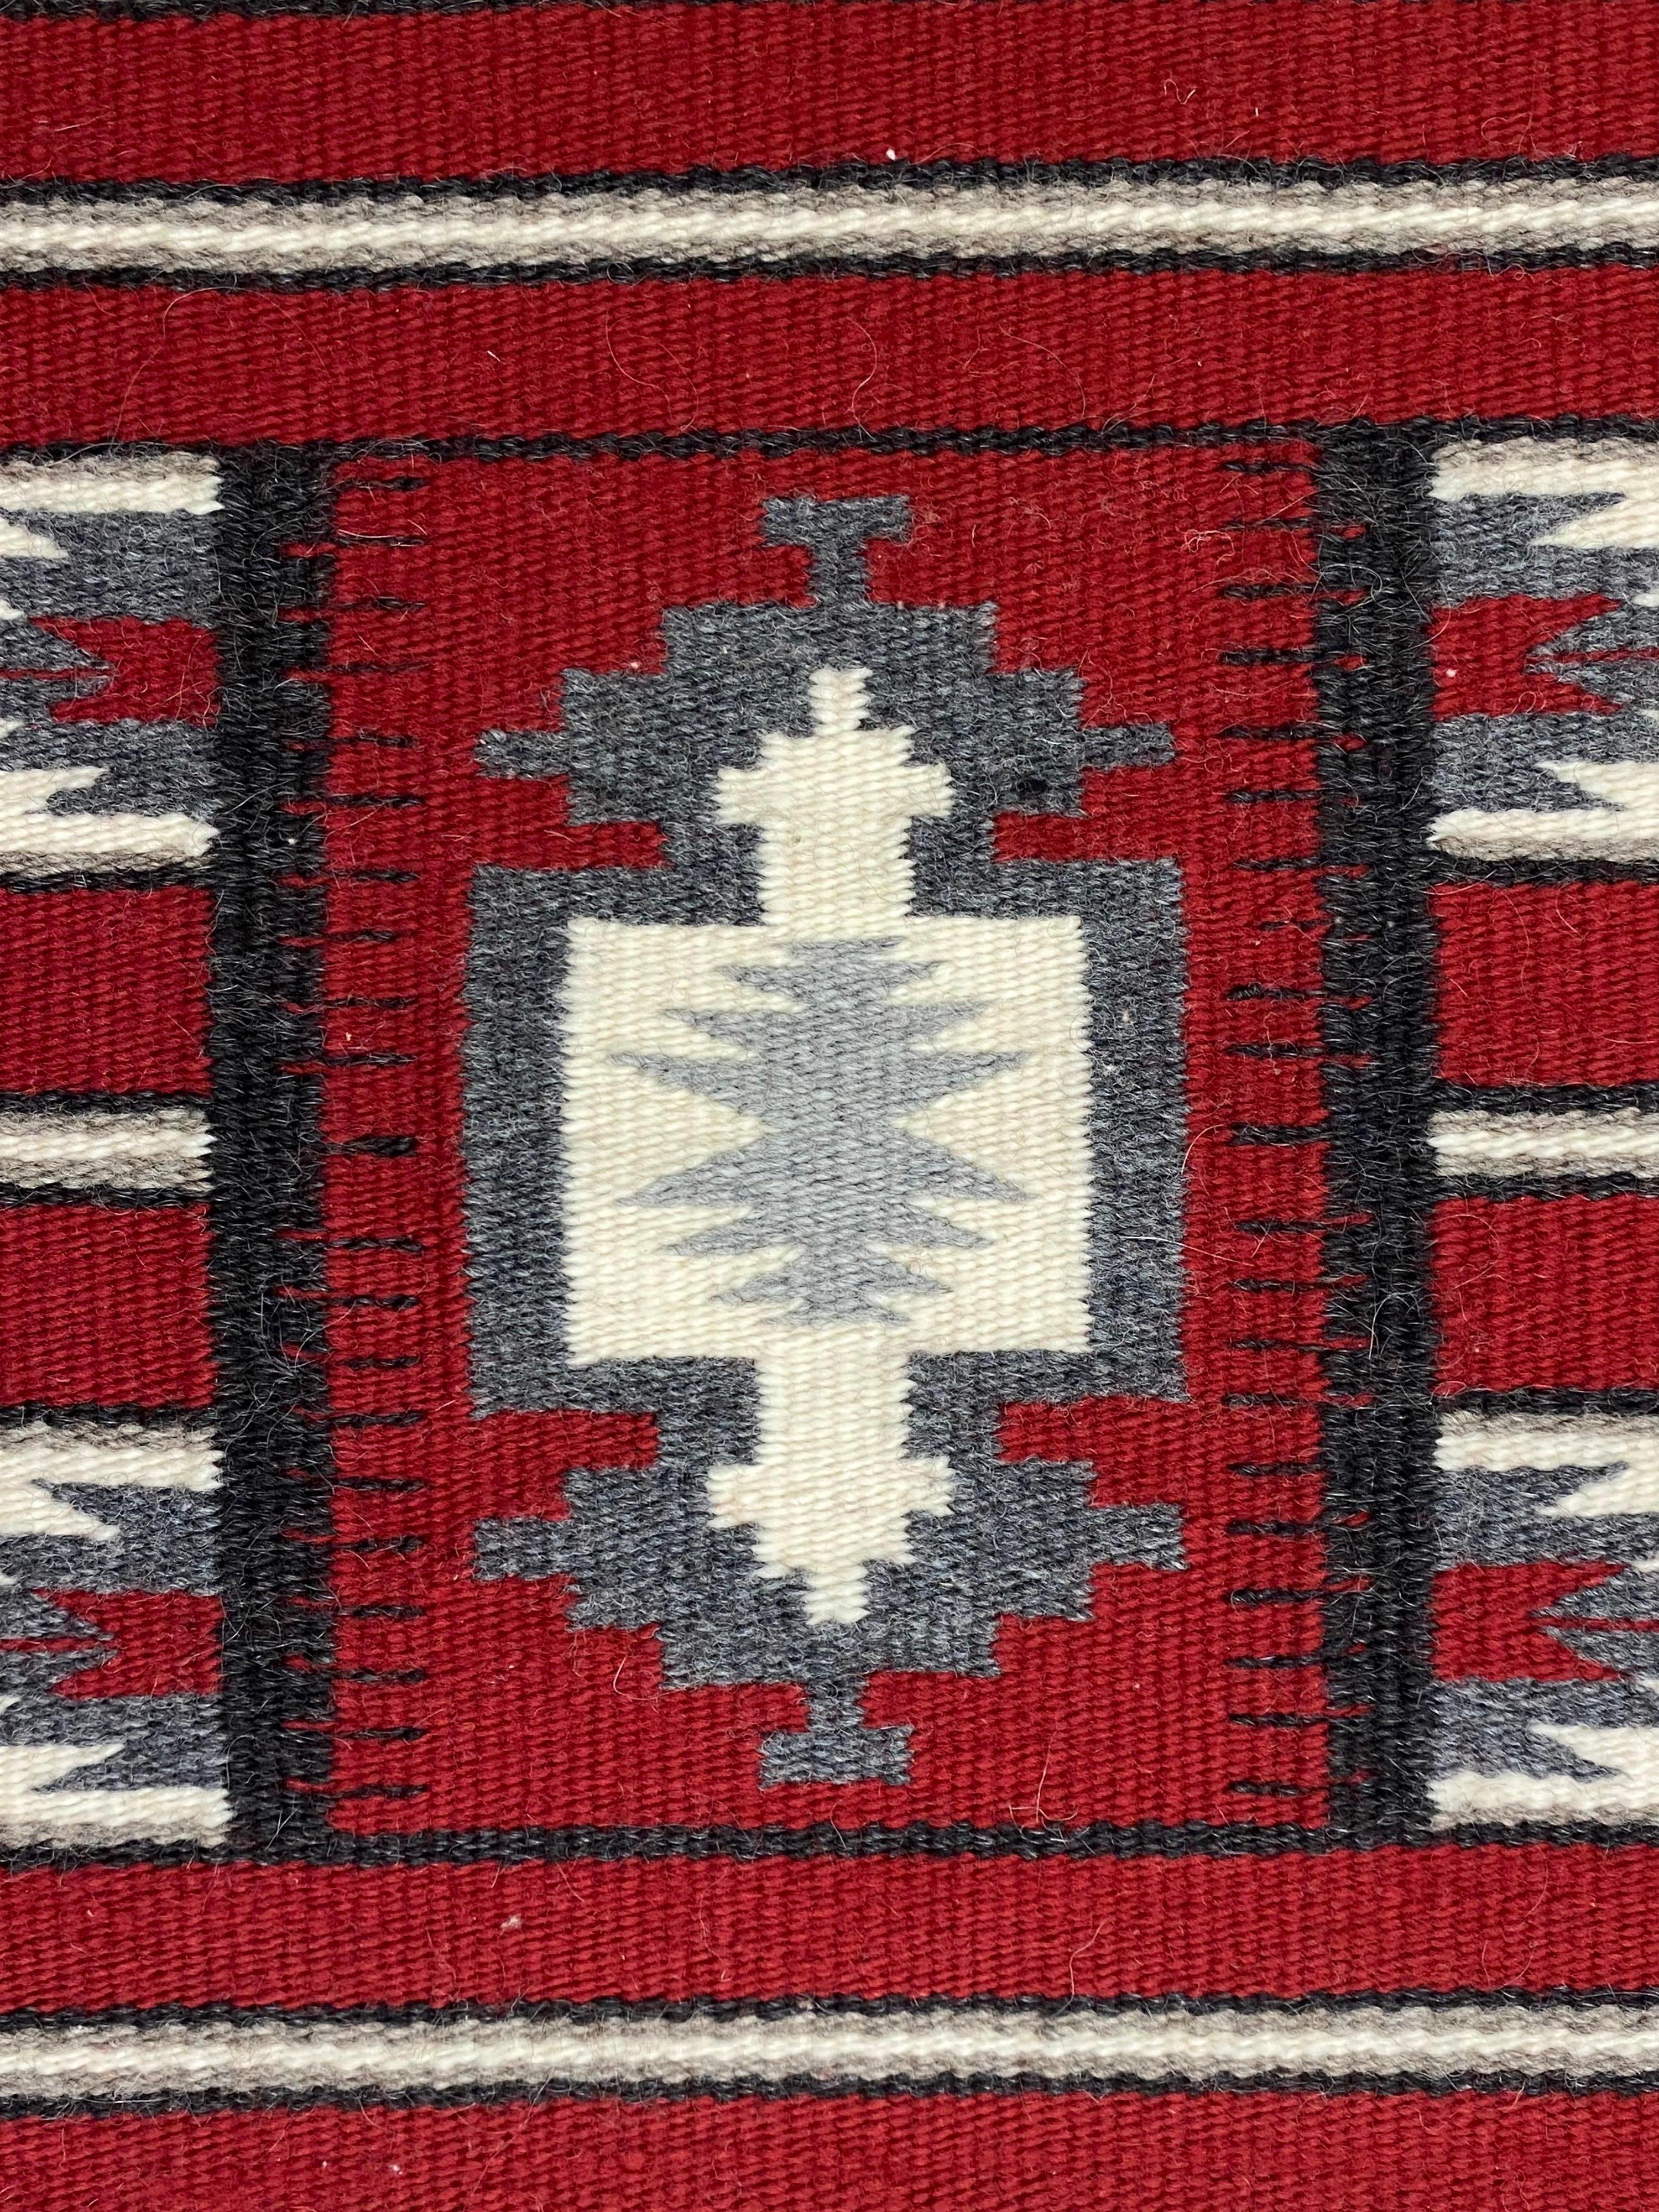 Small Ganado Red Rug by Mary James. Rug was purchased in 1997. Rug in very nice shape! Always hung on a wall and never walked on!.